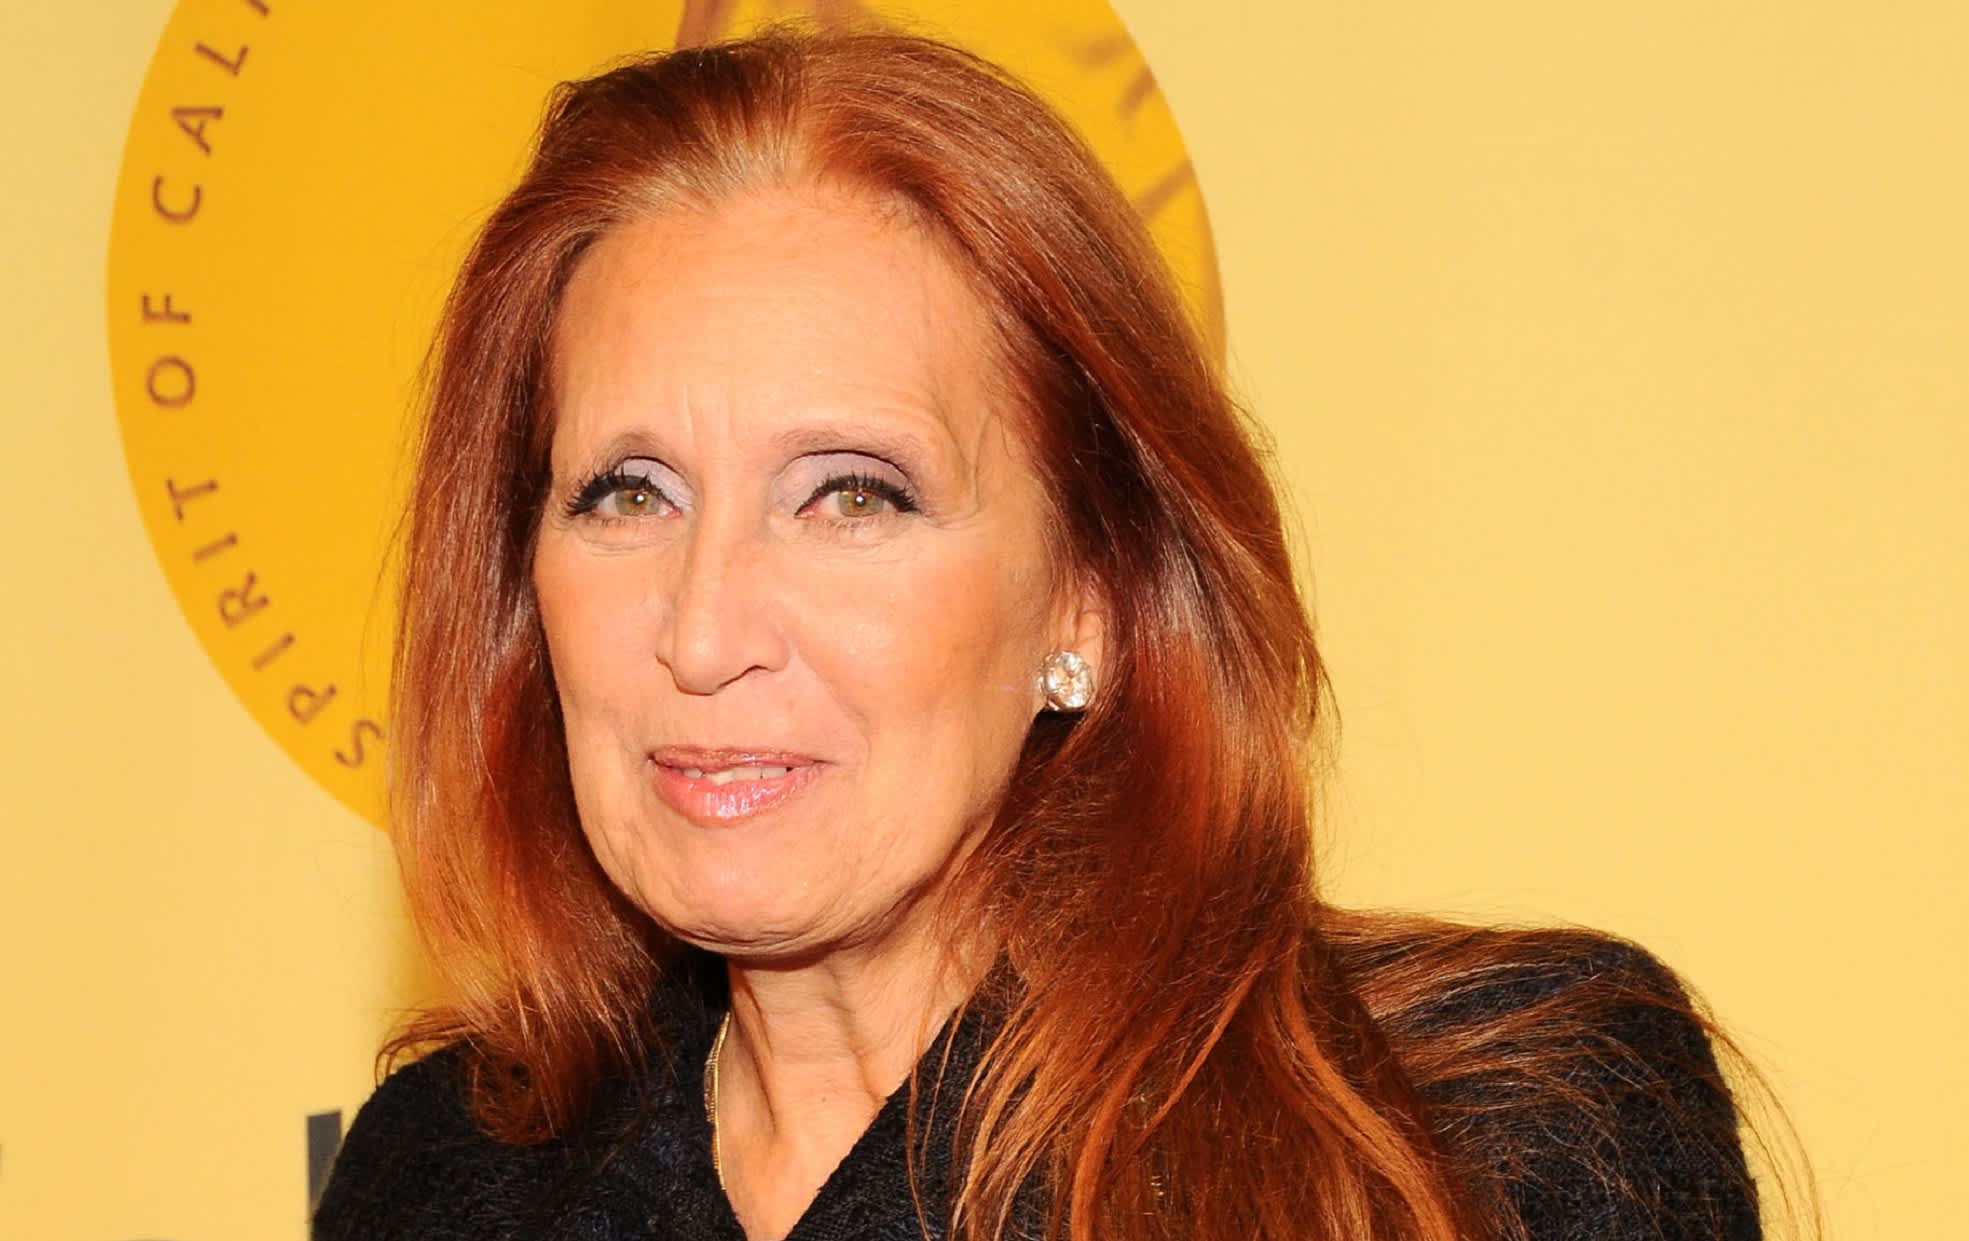 Danielle Steel has published 179 books and writes 20-22 hours a day